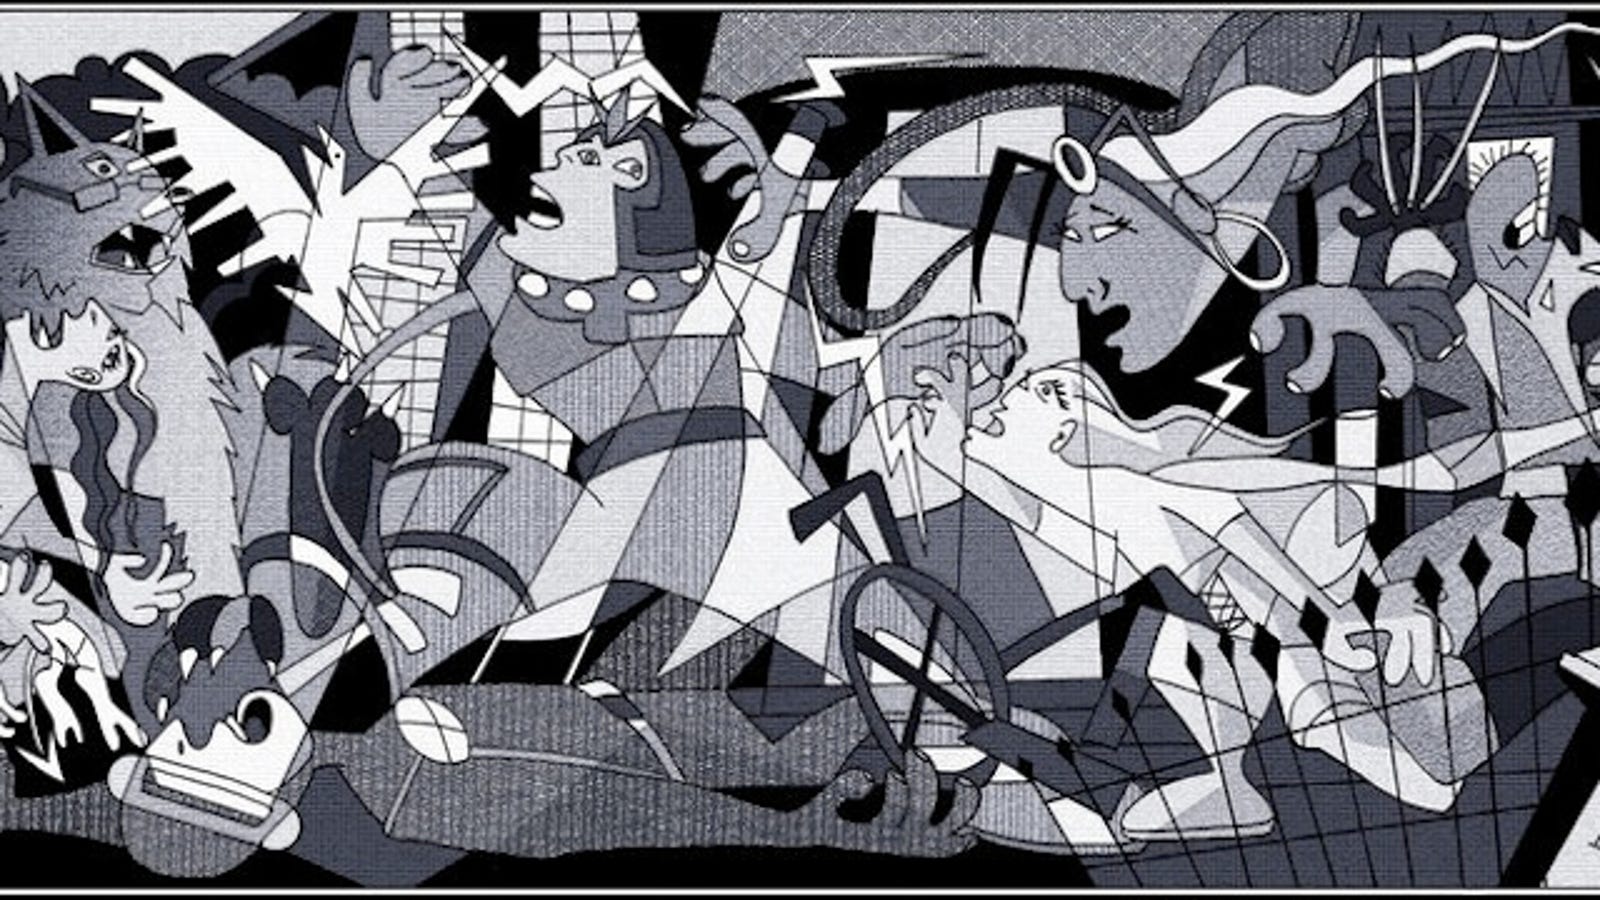 Picasso's Guernica, now featuring the X-Men